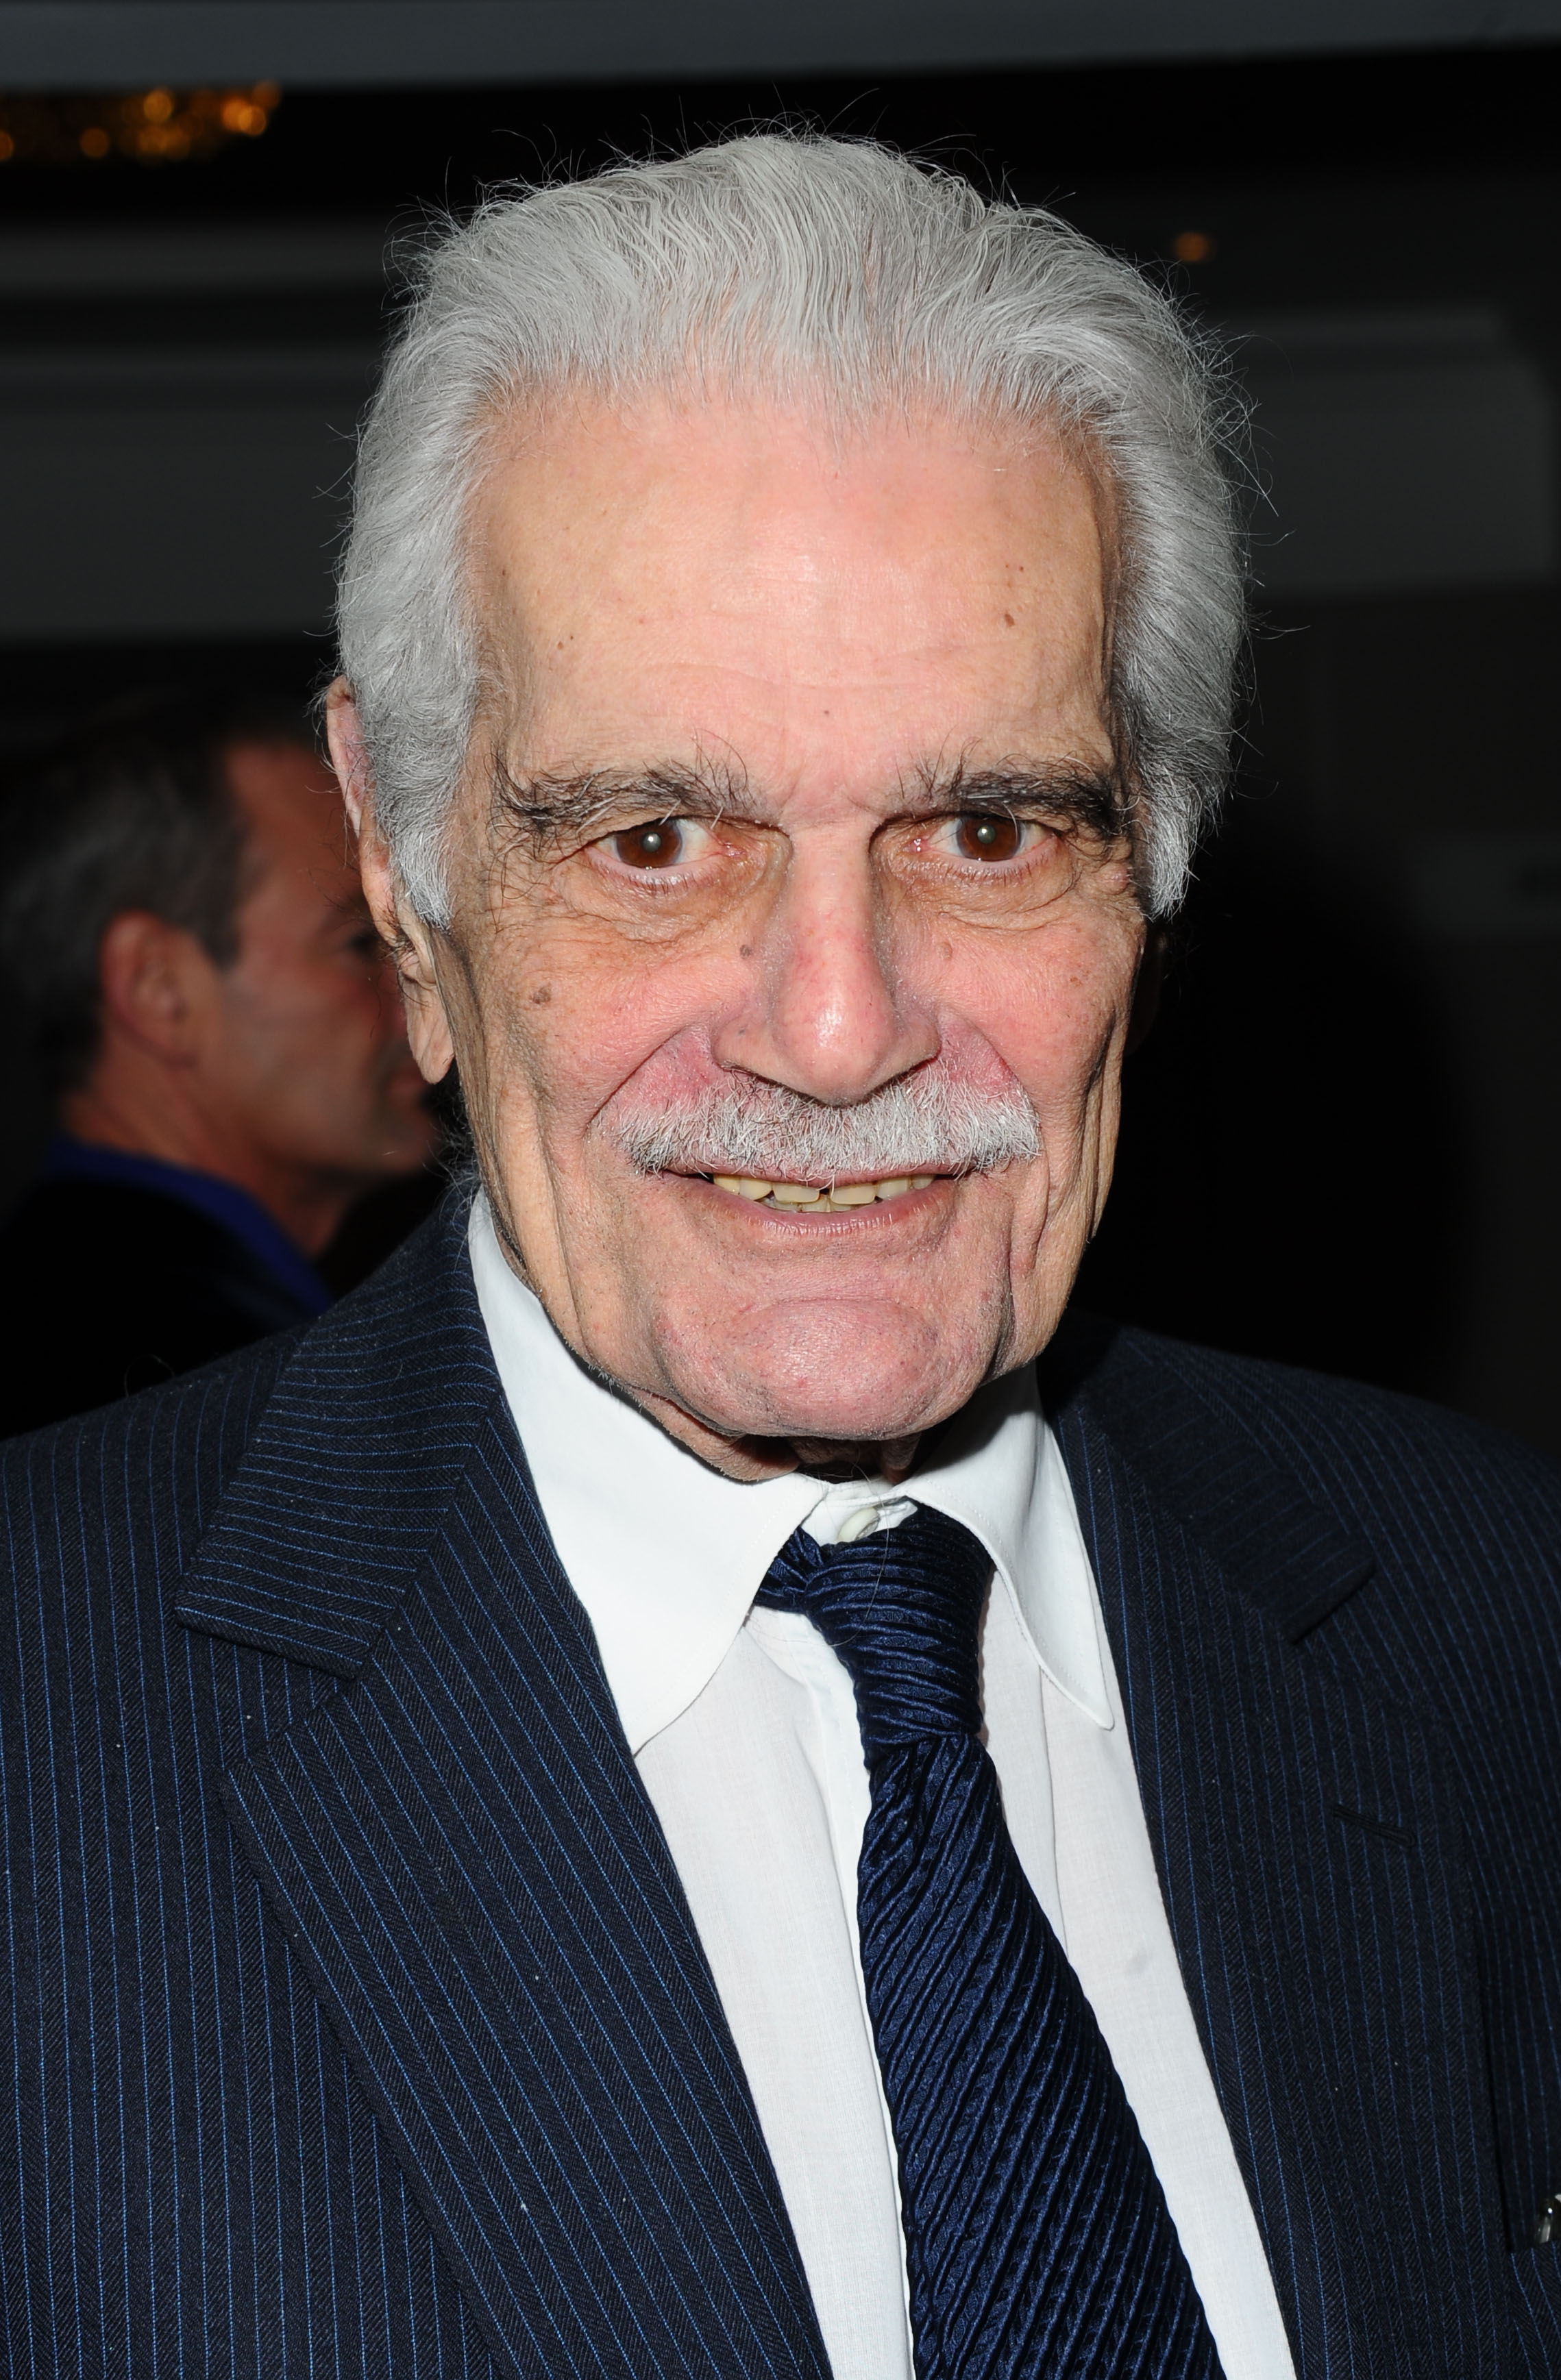 Omar Sharif attends the Chain of Hope Ball, raising funds for children suffering from heart disease, at The Grosvenor House Hotel on November 21, 2014 in London, England. (David M. Benett&mdash;Getty Images)